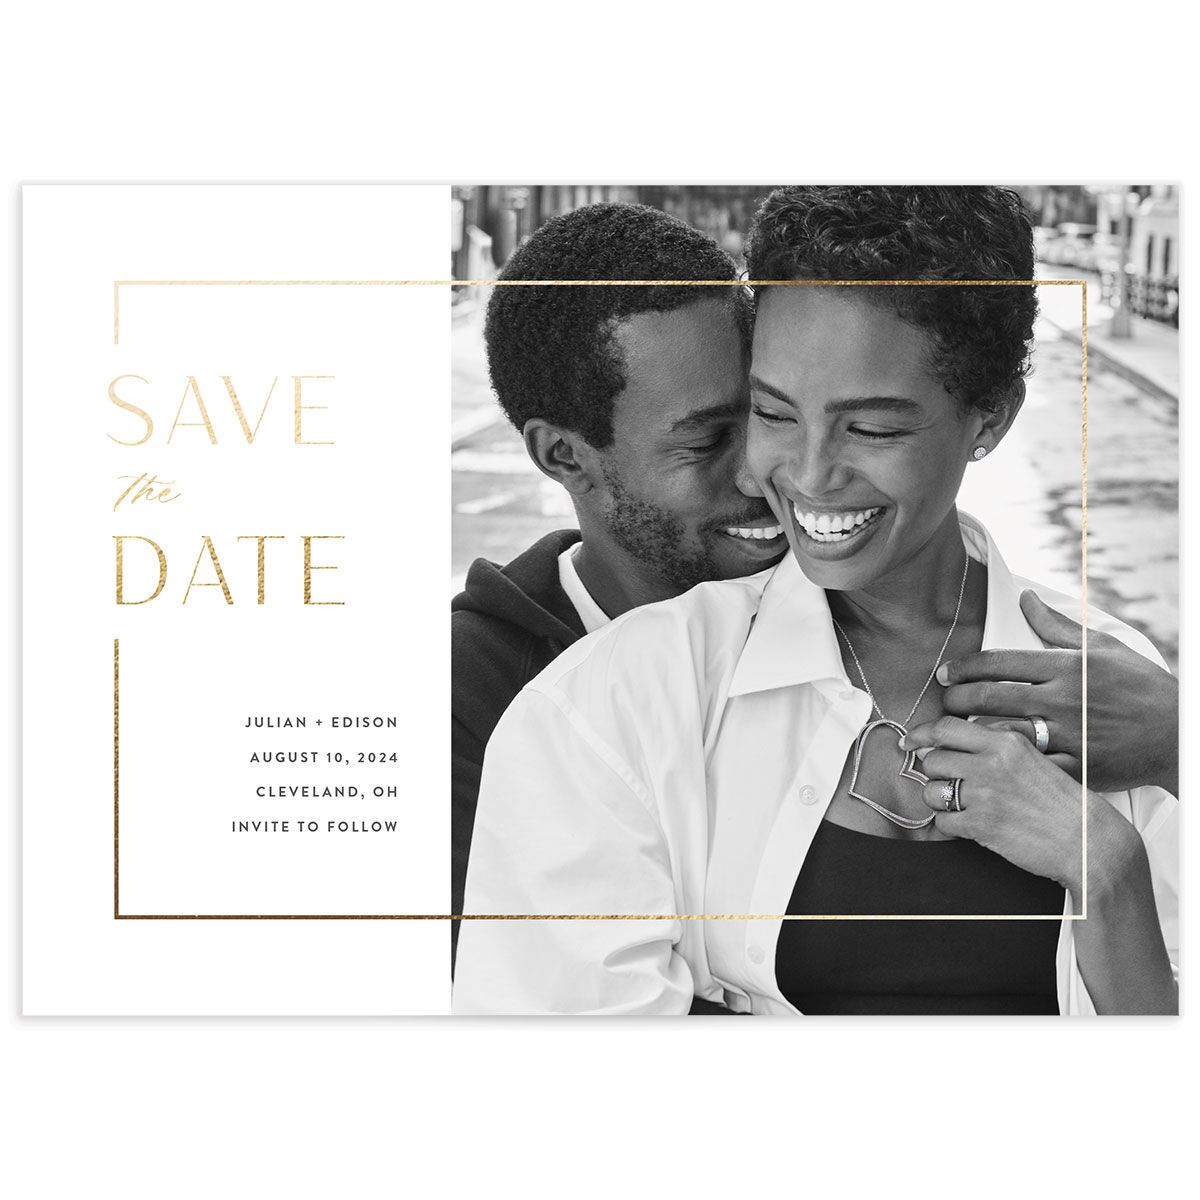 Wedding Save The Dates Elegant To Rustic Designs The Knot